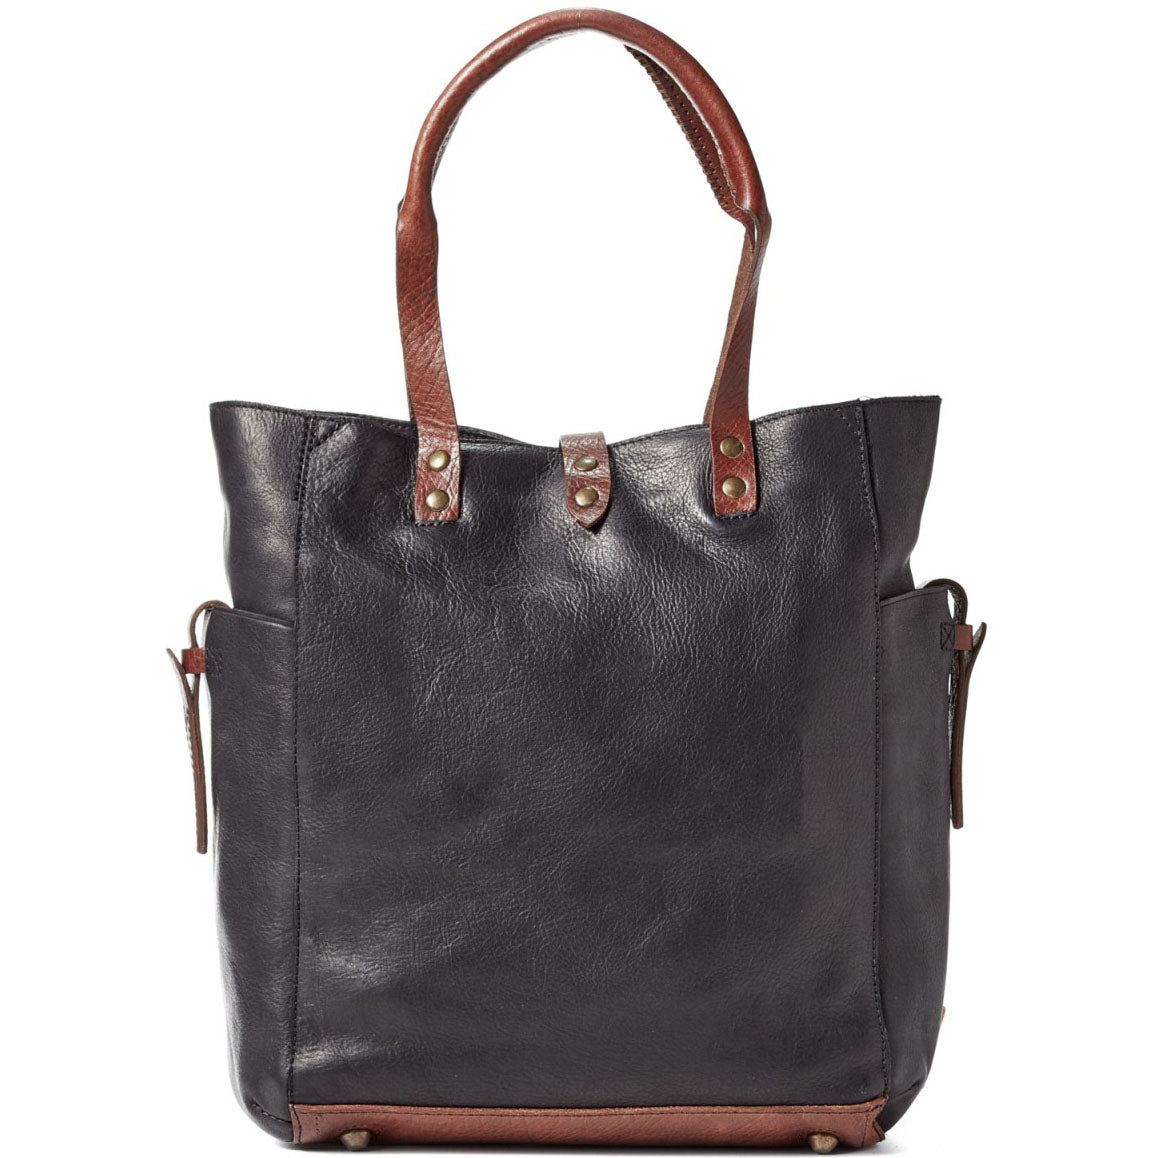 Will Leather Goods The Journey Collection Women's Ashland Tote Bridle Leather, Black